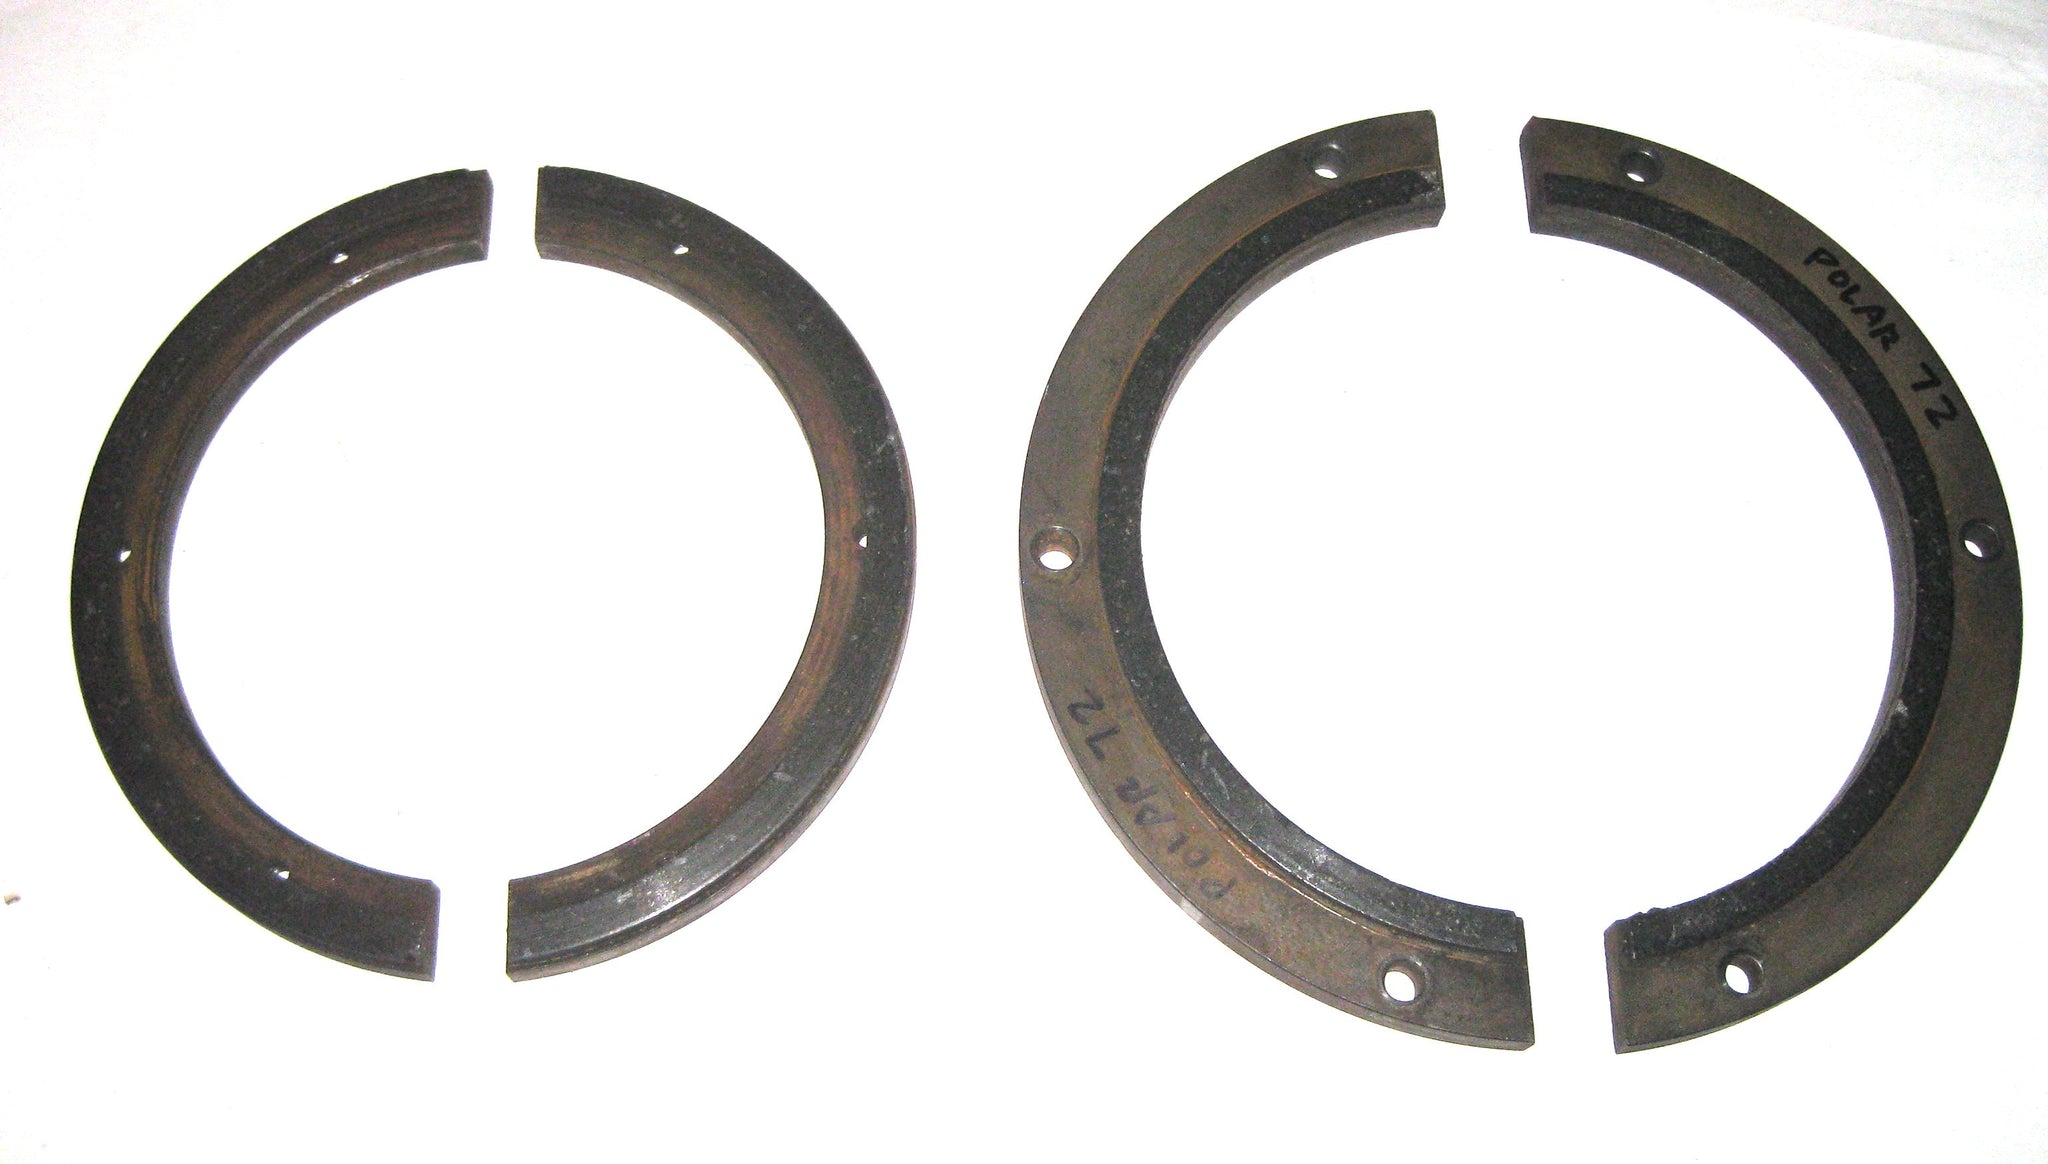 Used Clutch Brake Rings for Polar 72 CE paper cutter. part numbers 010300 and 010302